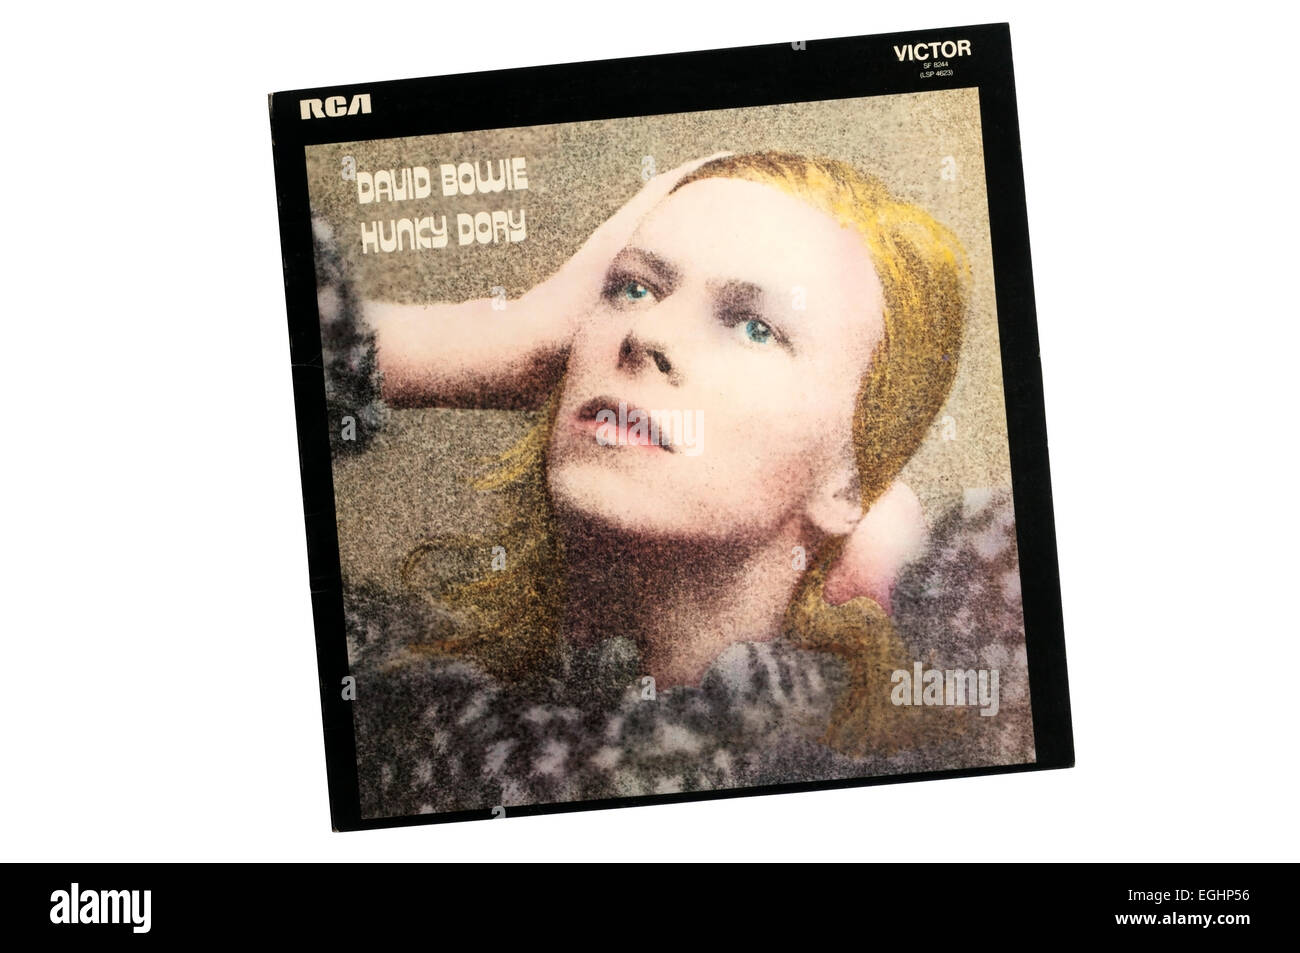 Hunky Dory was the 4th album by English singer-songwriter David Bowie. It was released by RCA Records in 1971. Stock Photo